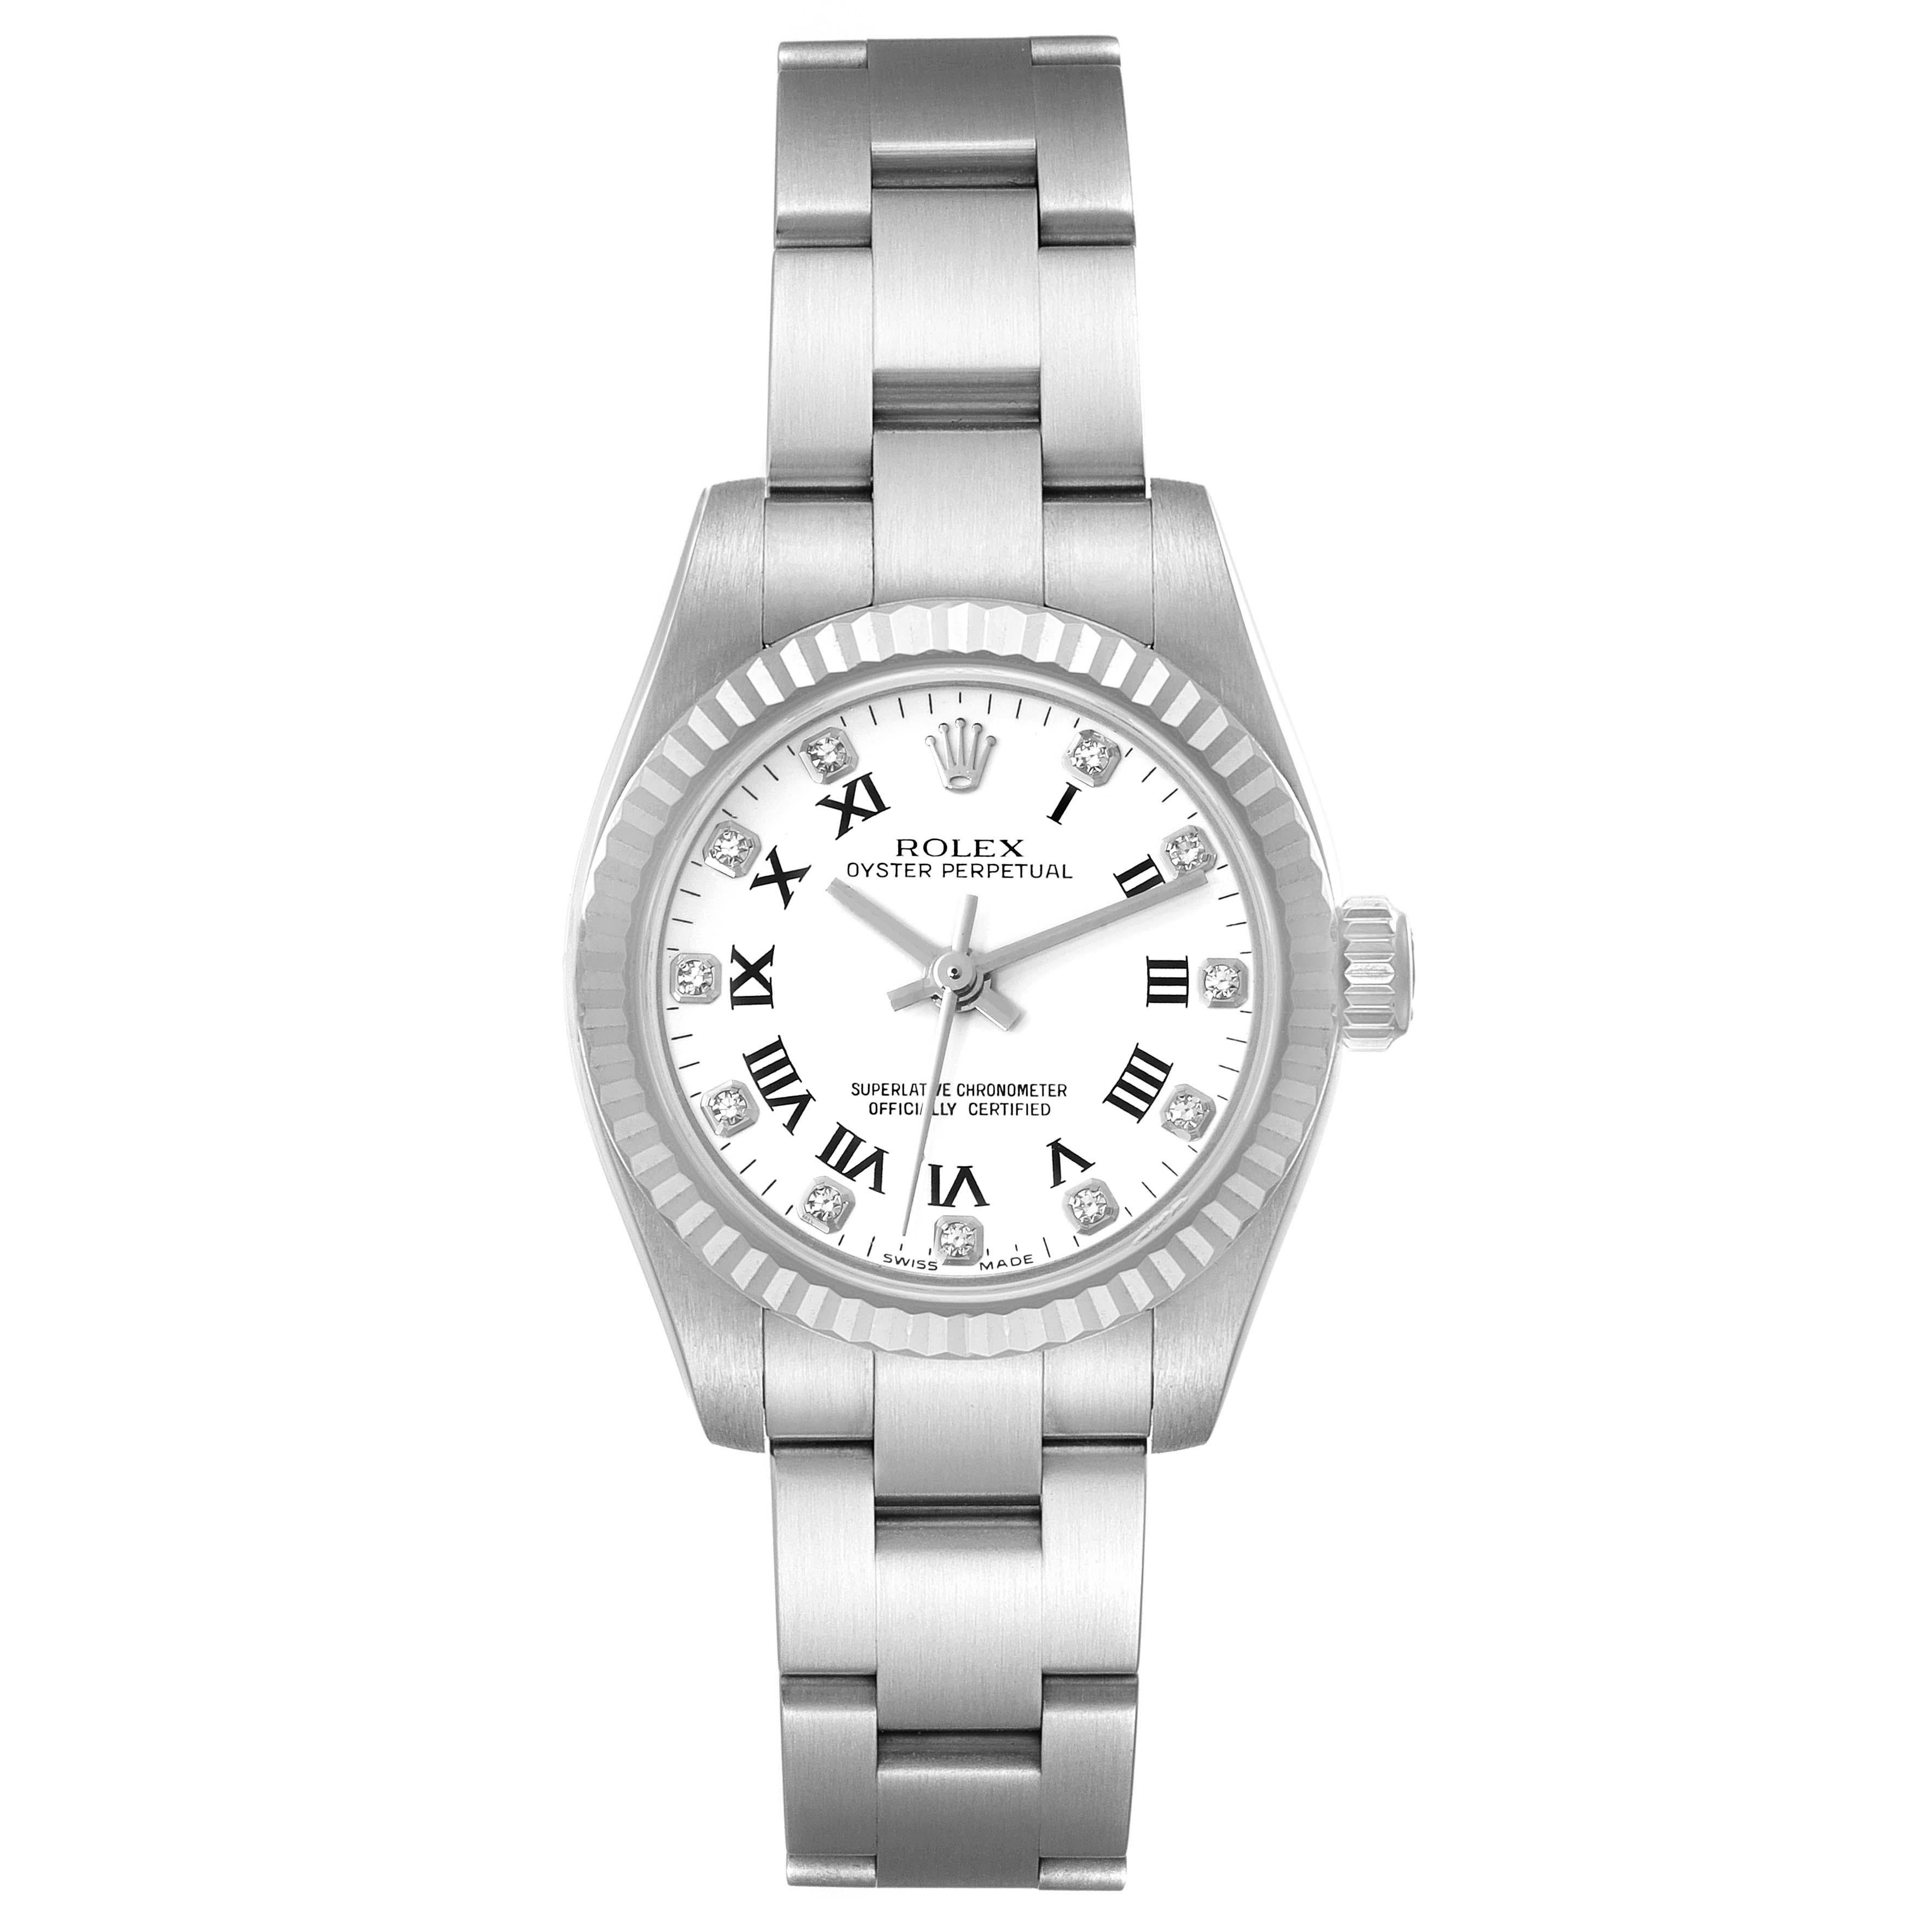 Rolex Oyster Perpetual 26 Steel White Gold Diamond Ladies Watch 176234. Officially certified chronometer self-winding automatic movement with quickset date function. Stainless steel oyster case 26.0 mm in diameter. Rolex logo on a crown. 18K white